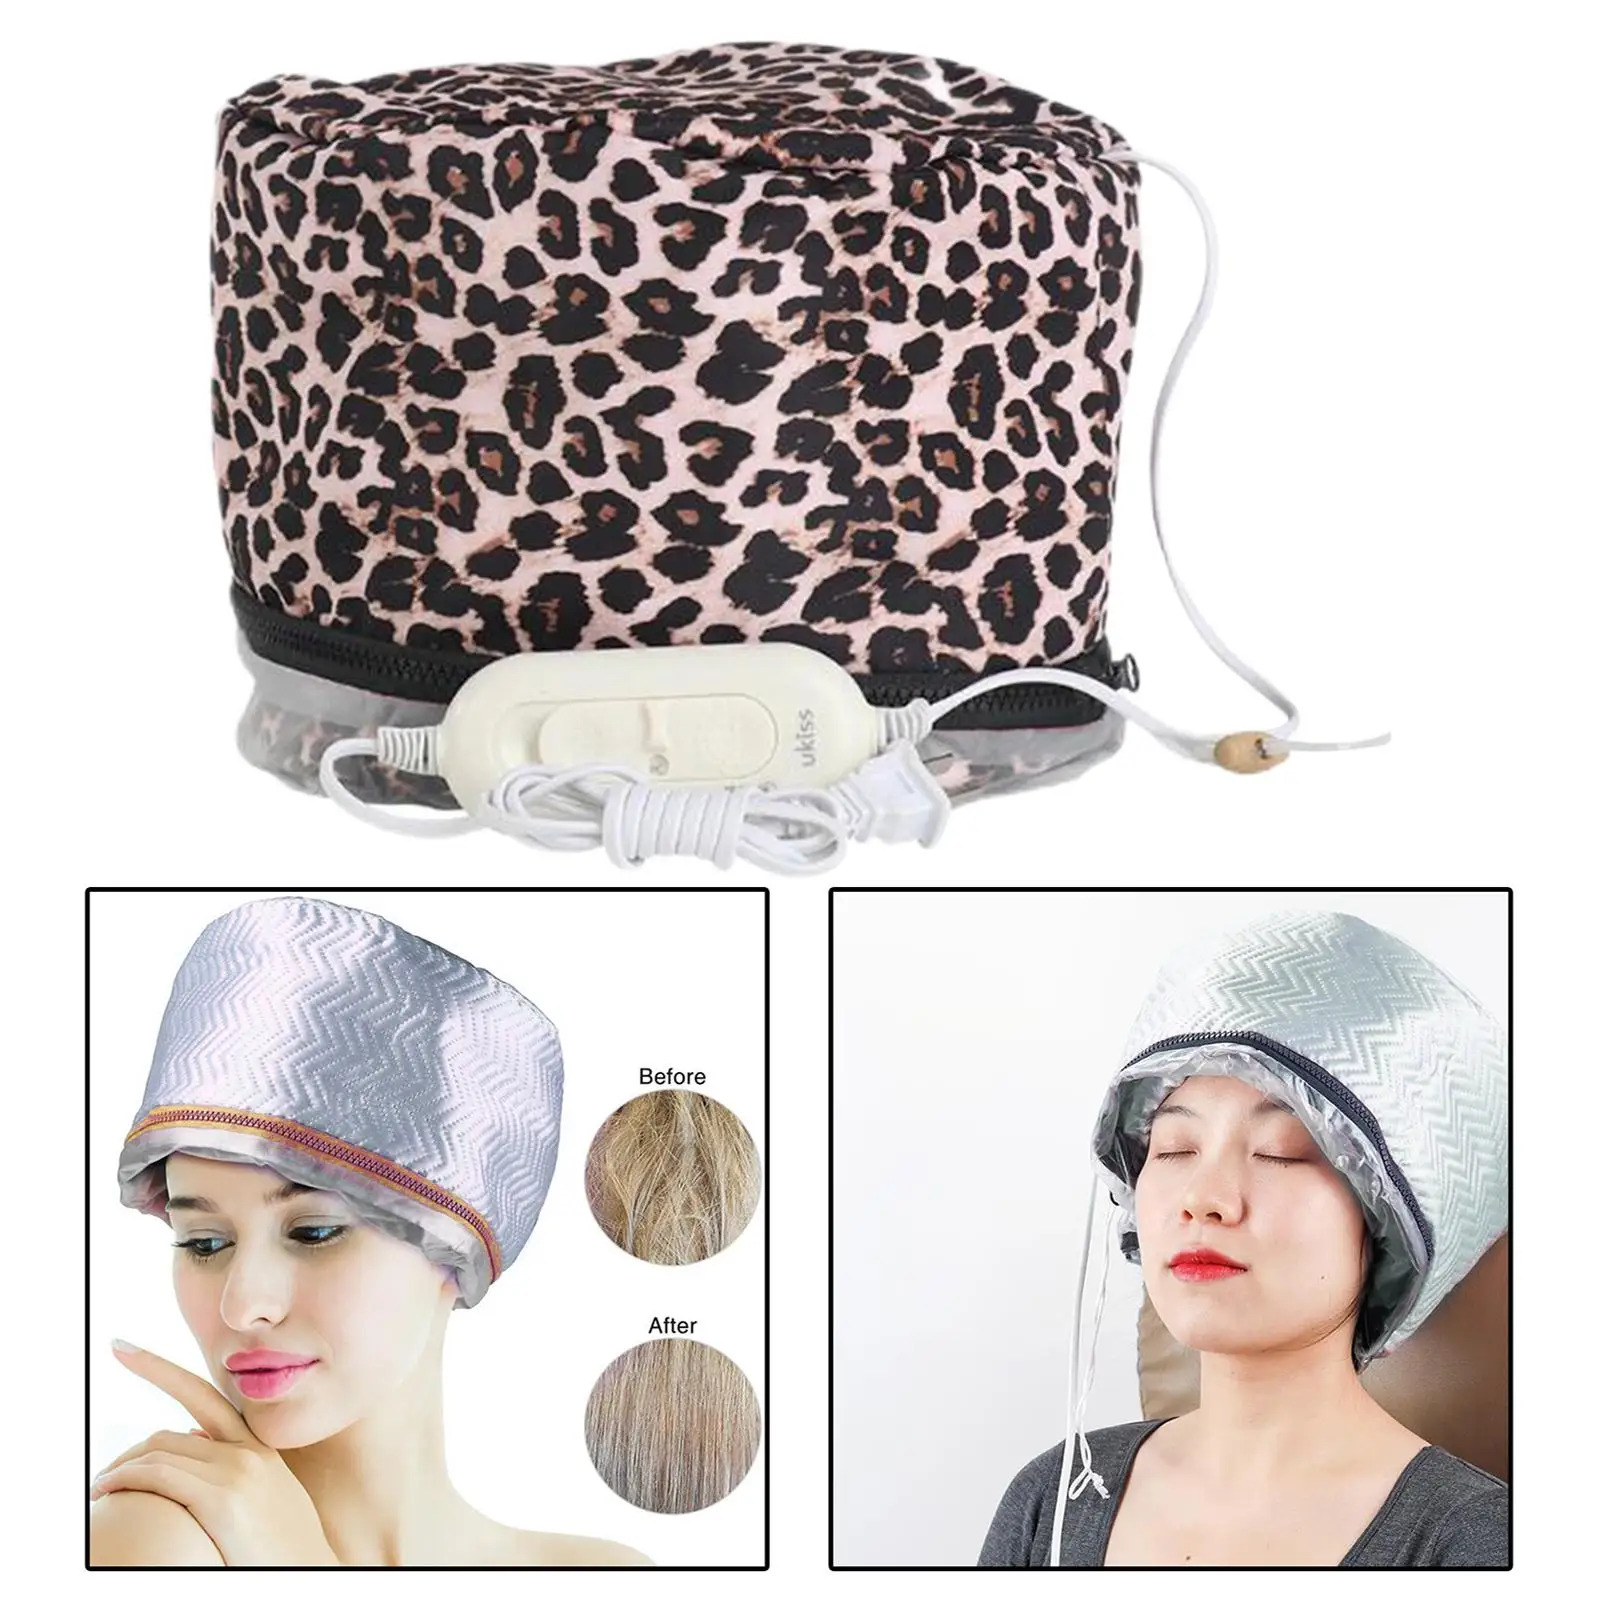 Hair Care Hat Waterproof Deep Conditioning Moisturizing Thermal  3 Level Temperature Control  Personal Care Leopard 